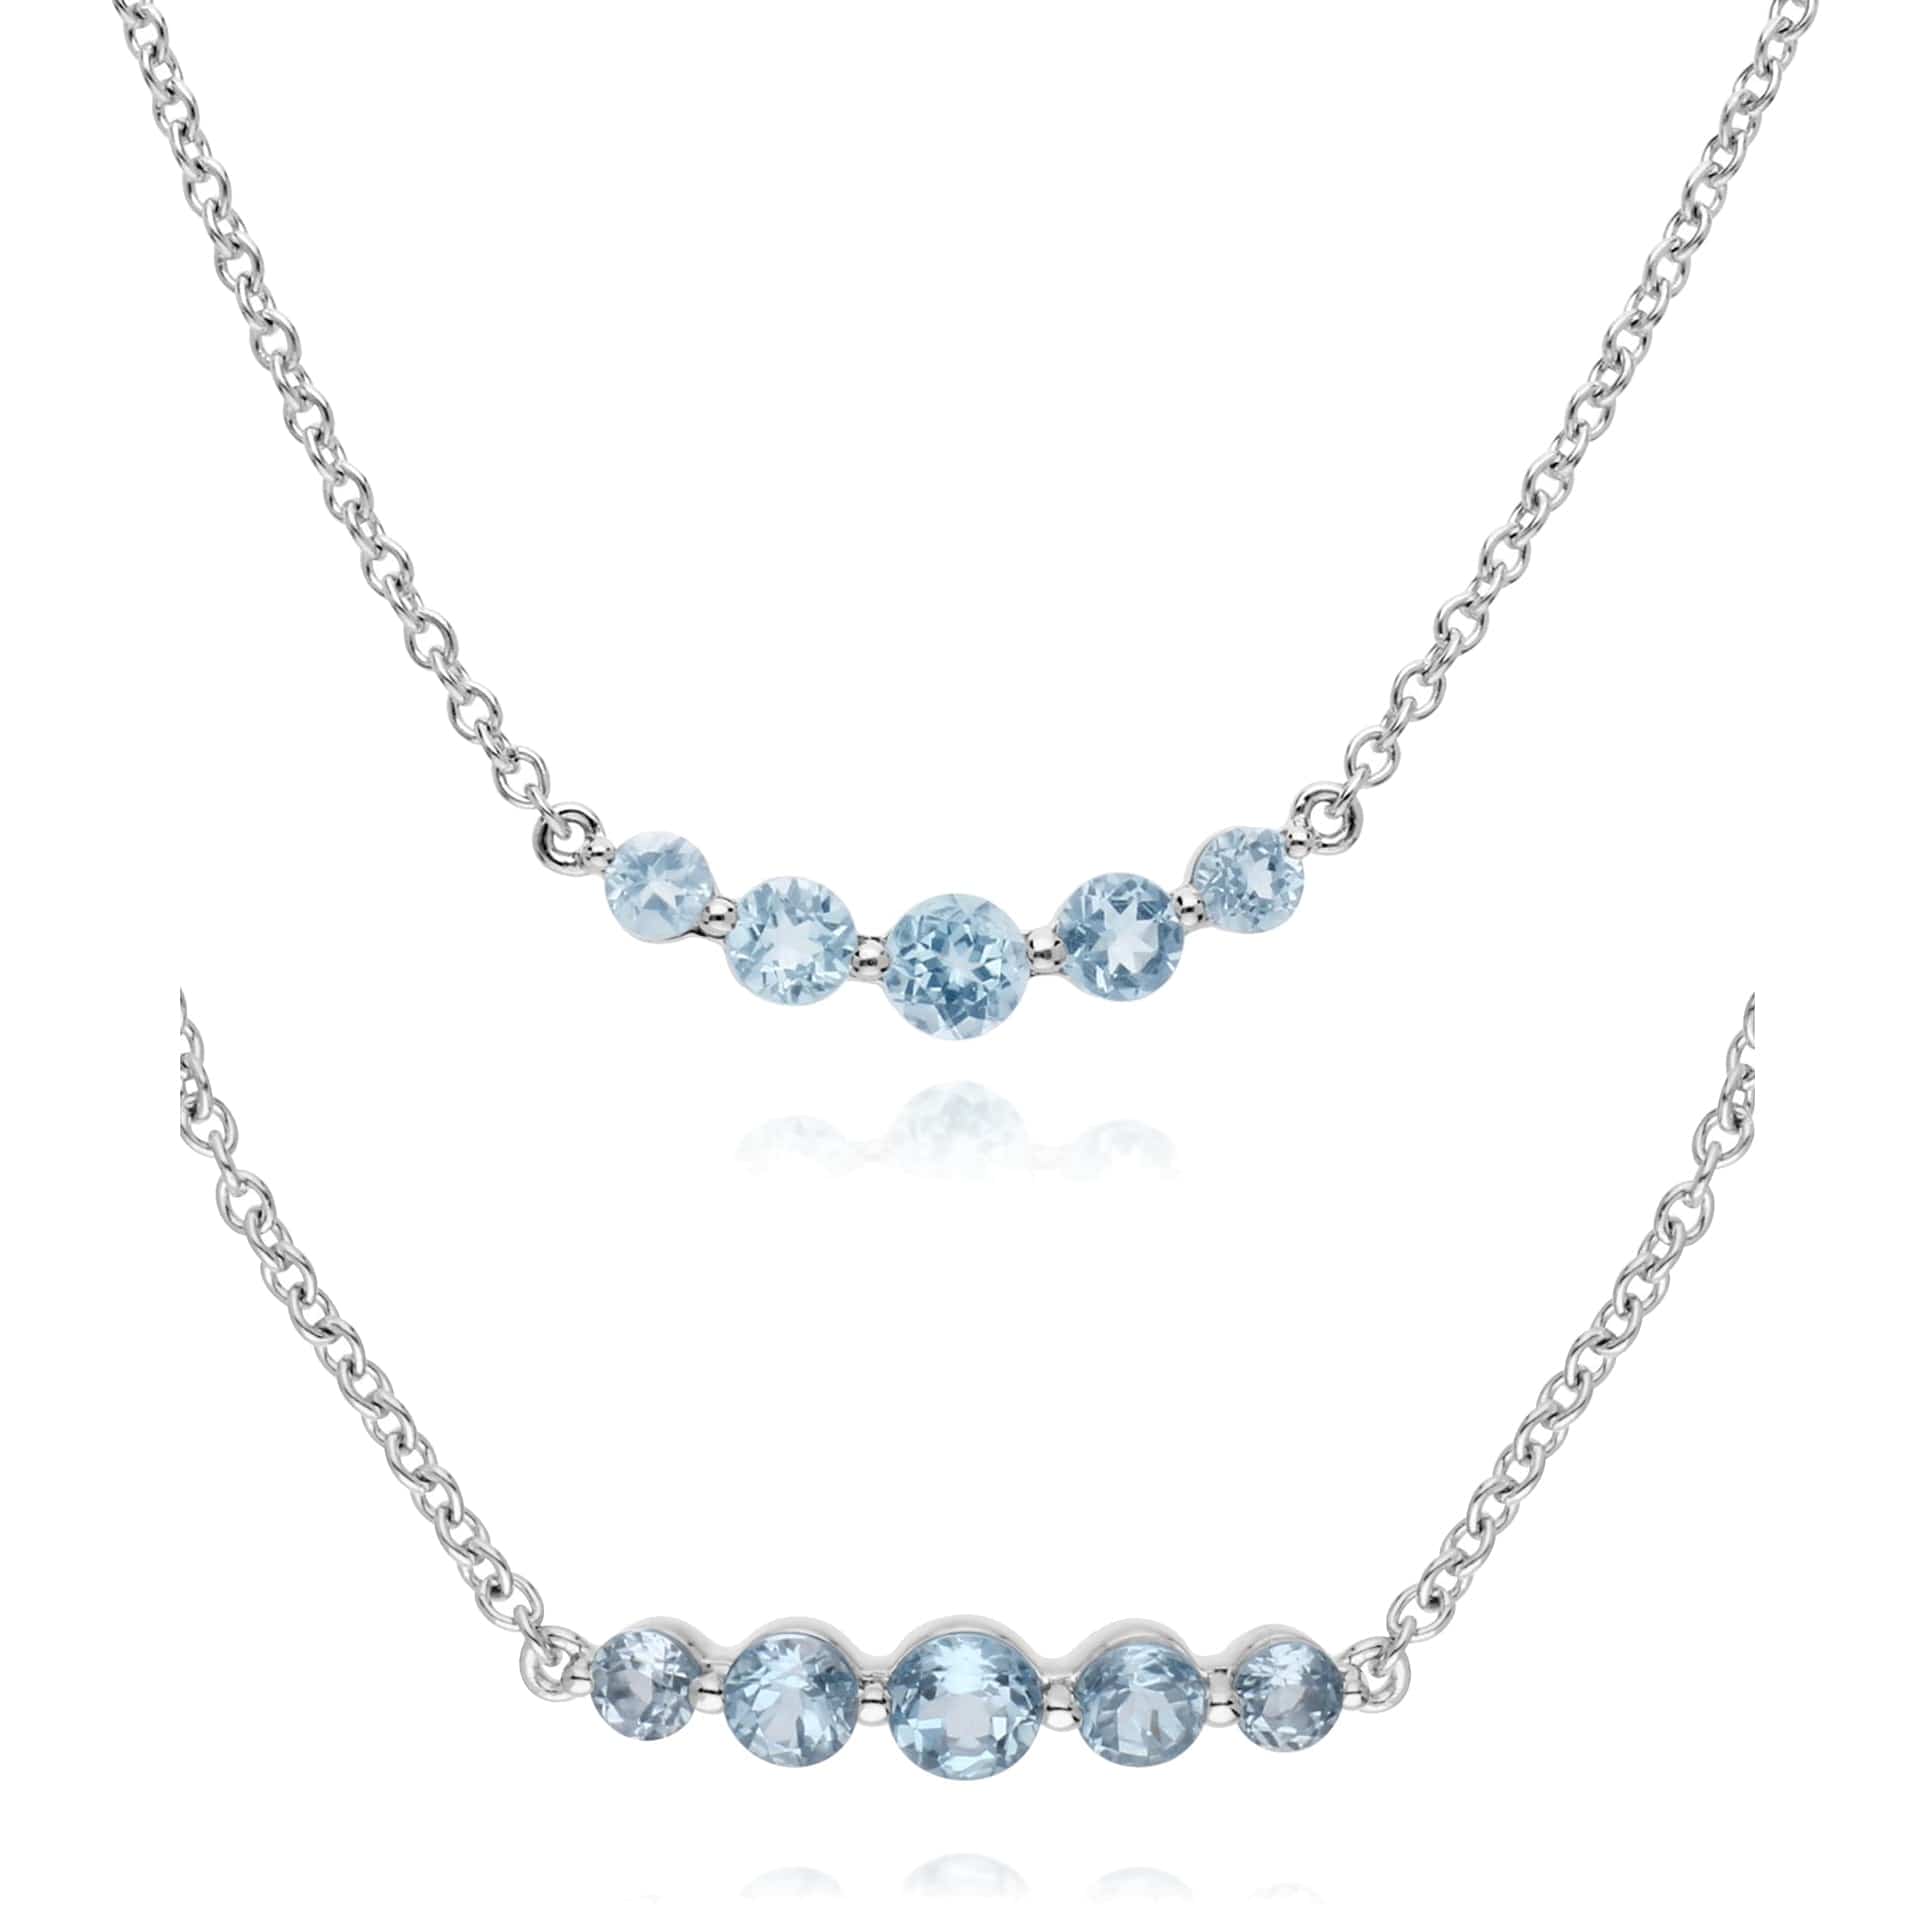 270N034101925-270L011001925 Classic Round Blue Topaz Five Stone Gradient Bracelet & Necklace Set in 925 Sterling Silver 1